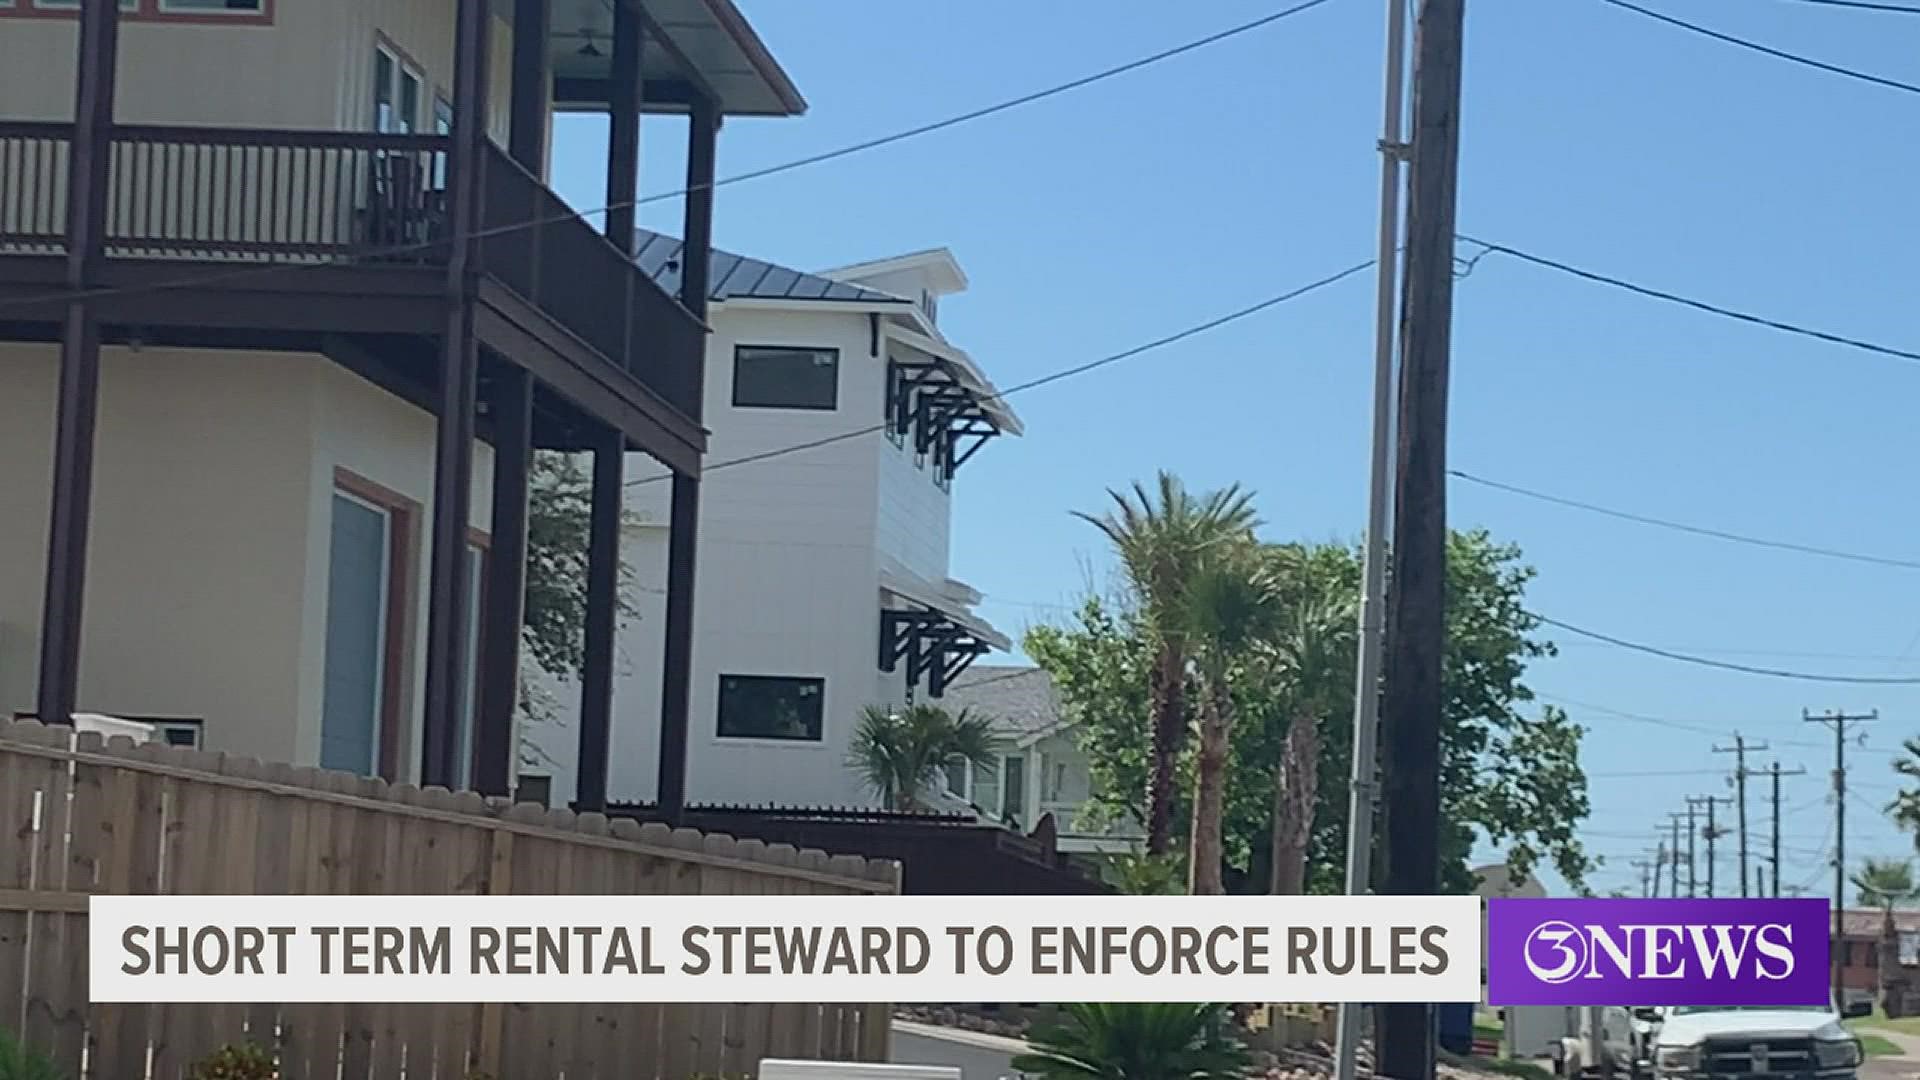 Short-term rental clients could face fines from between $500-$2,000 depending on the offense.